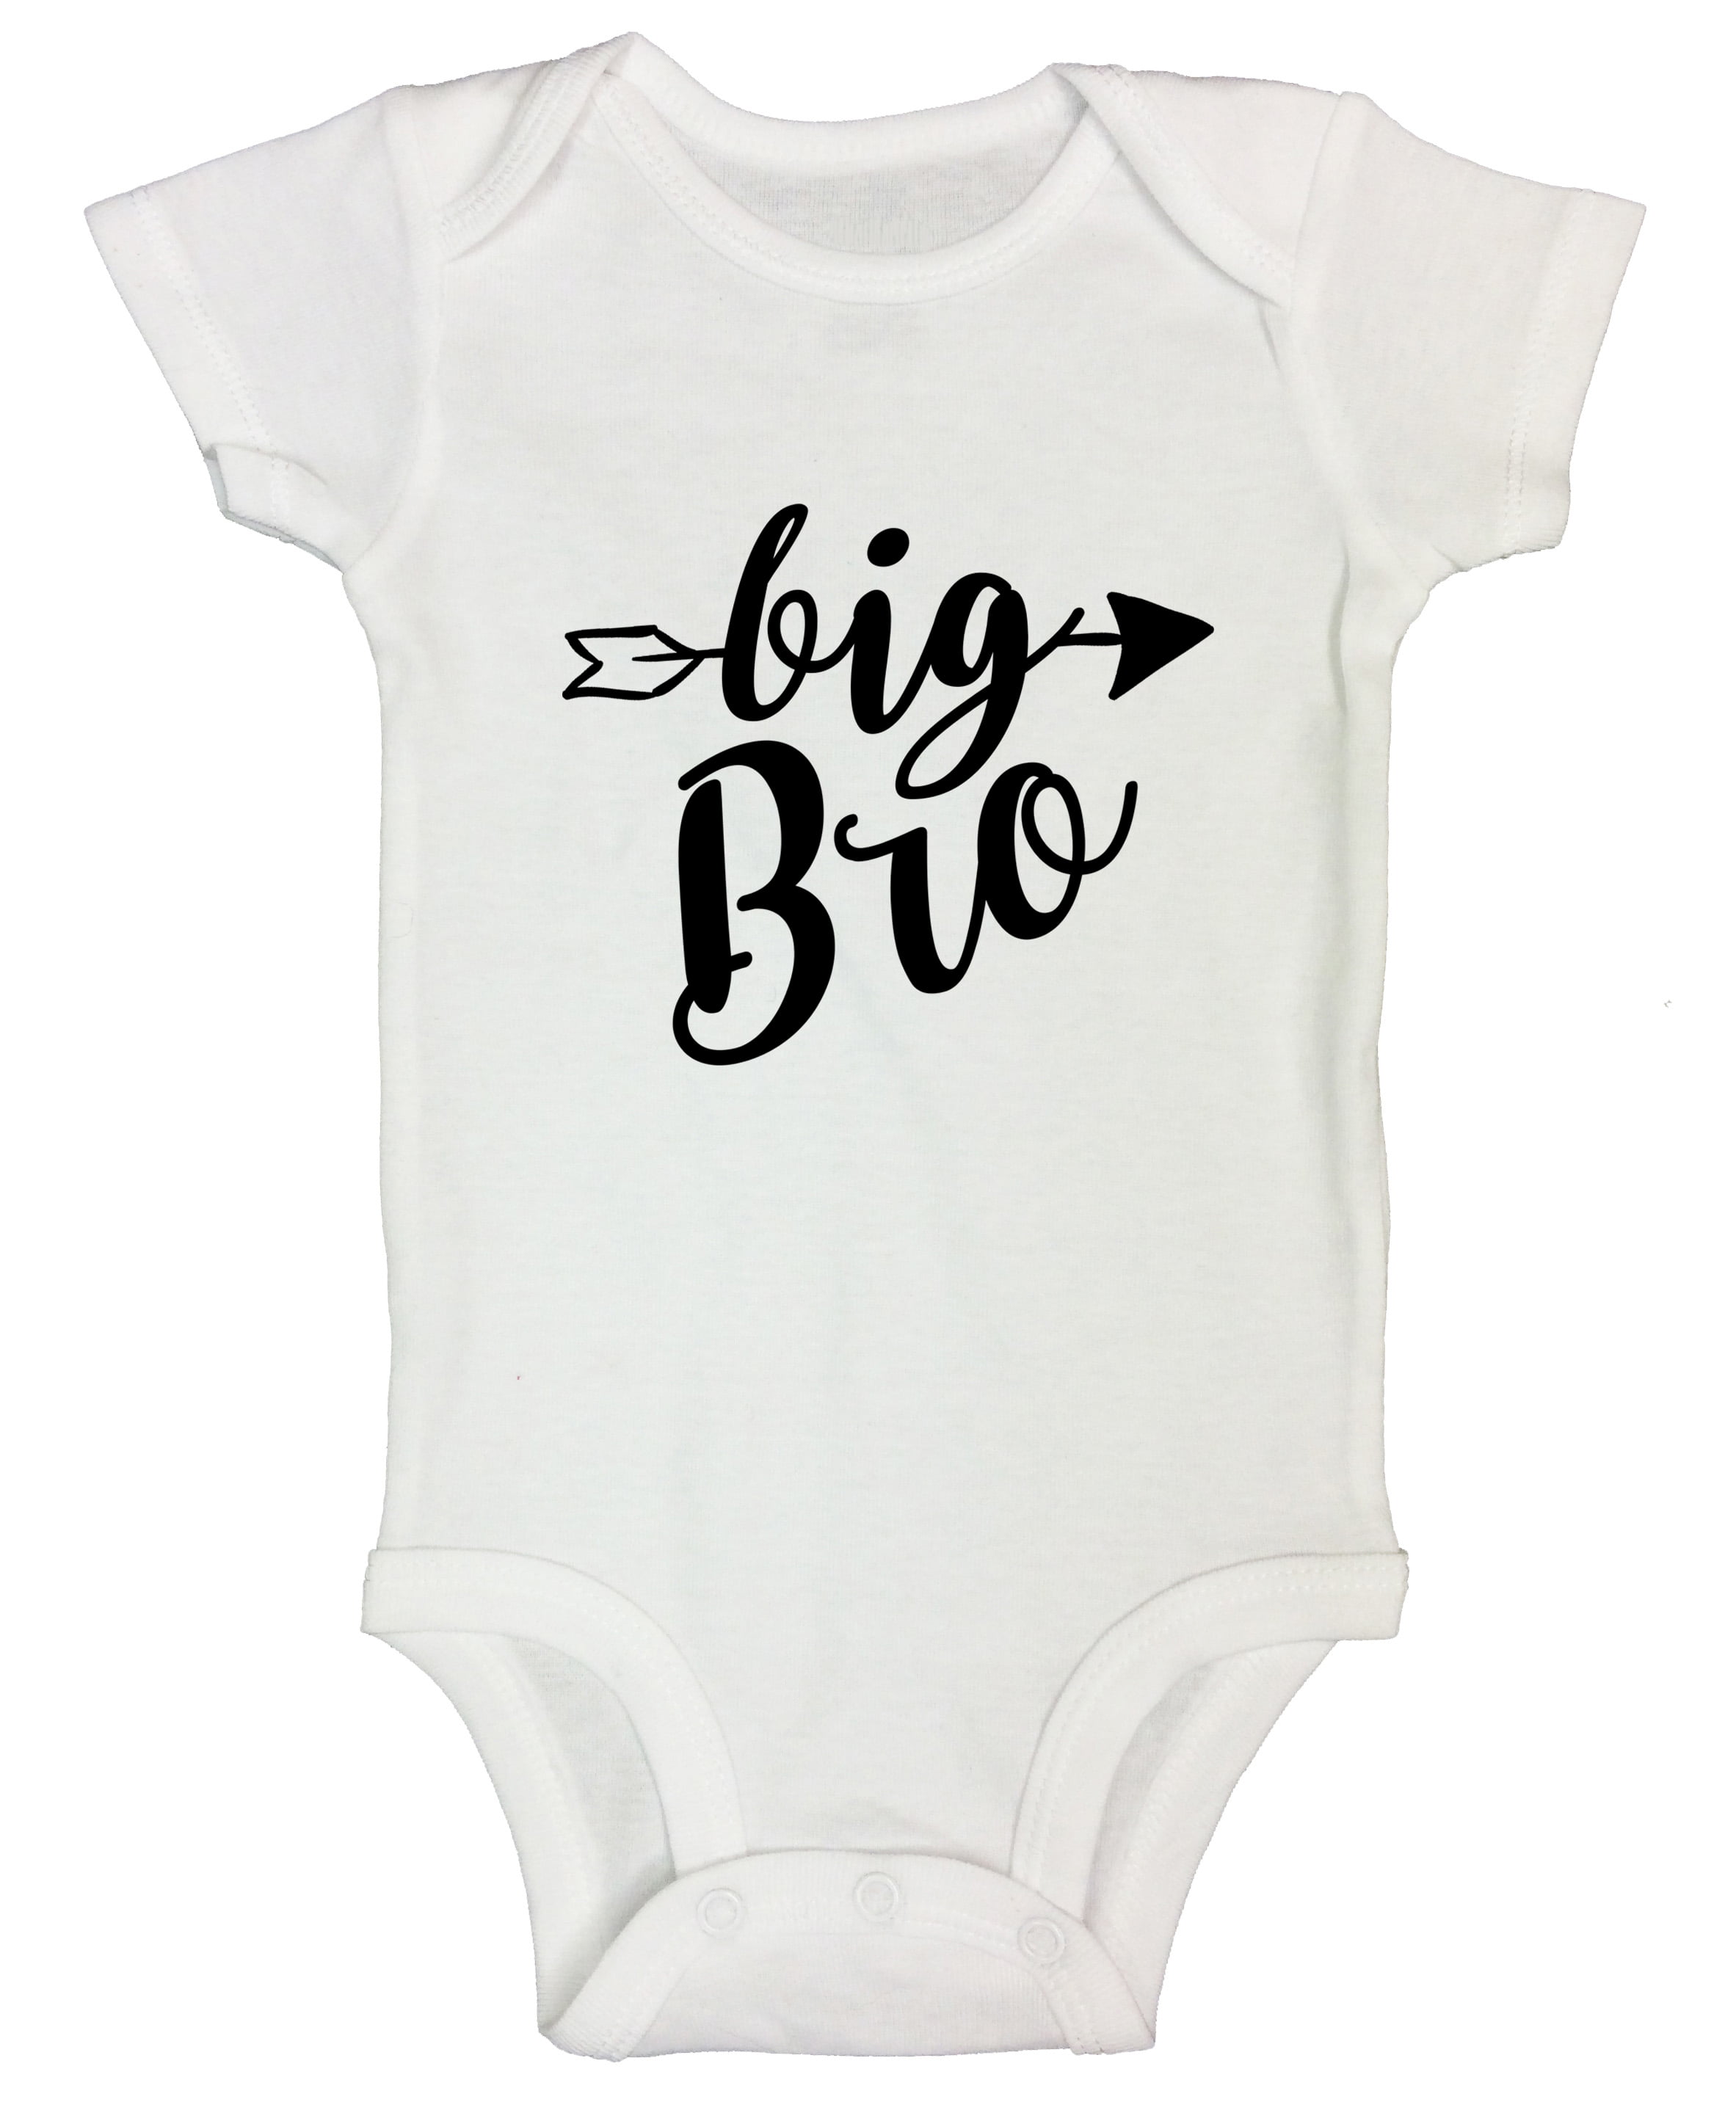 Details about   Big Brother Announcement New Sibling Matching Brother Sister  Infant Bodysuit 